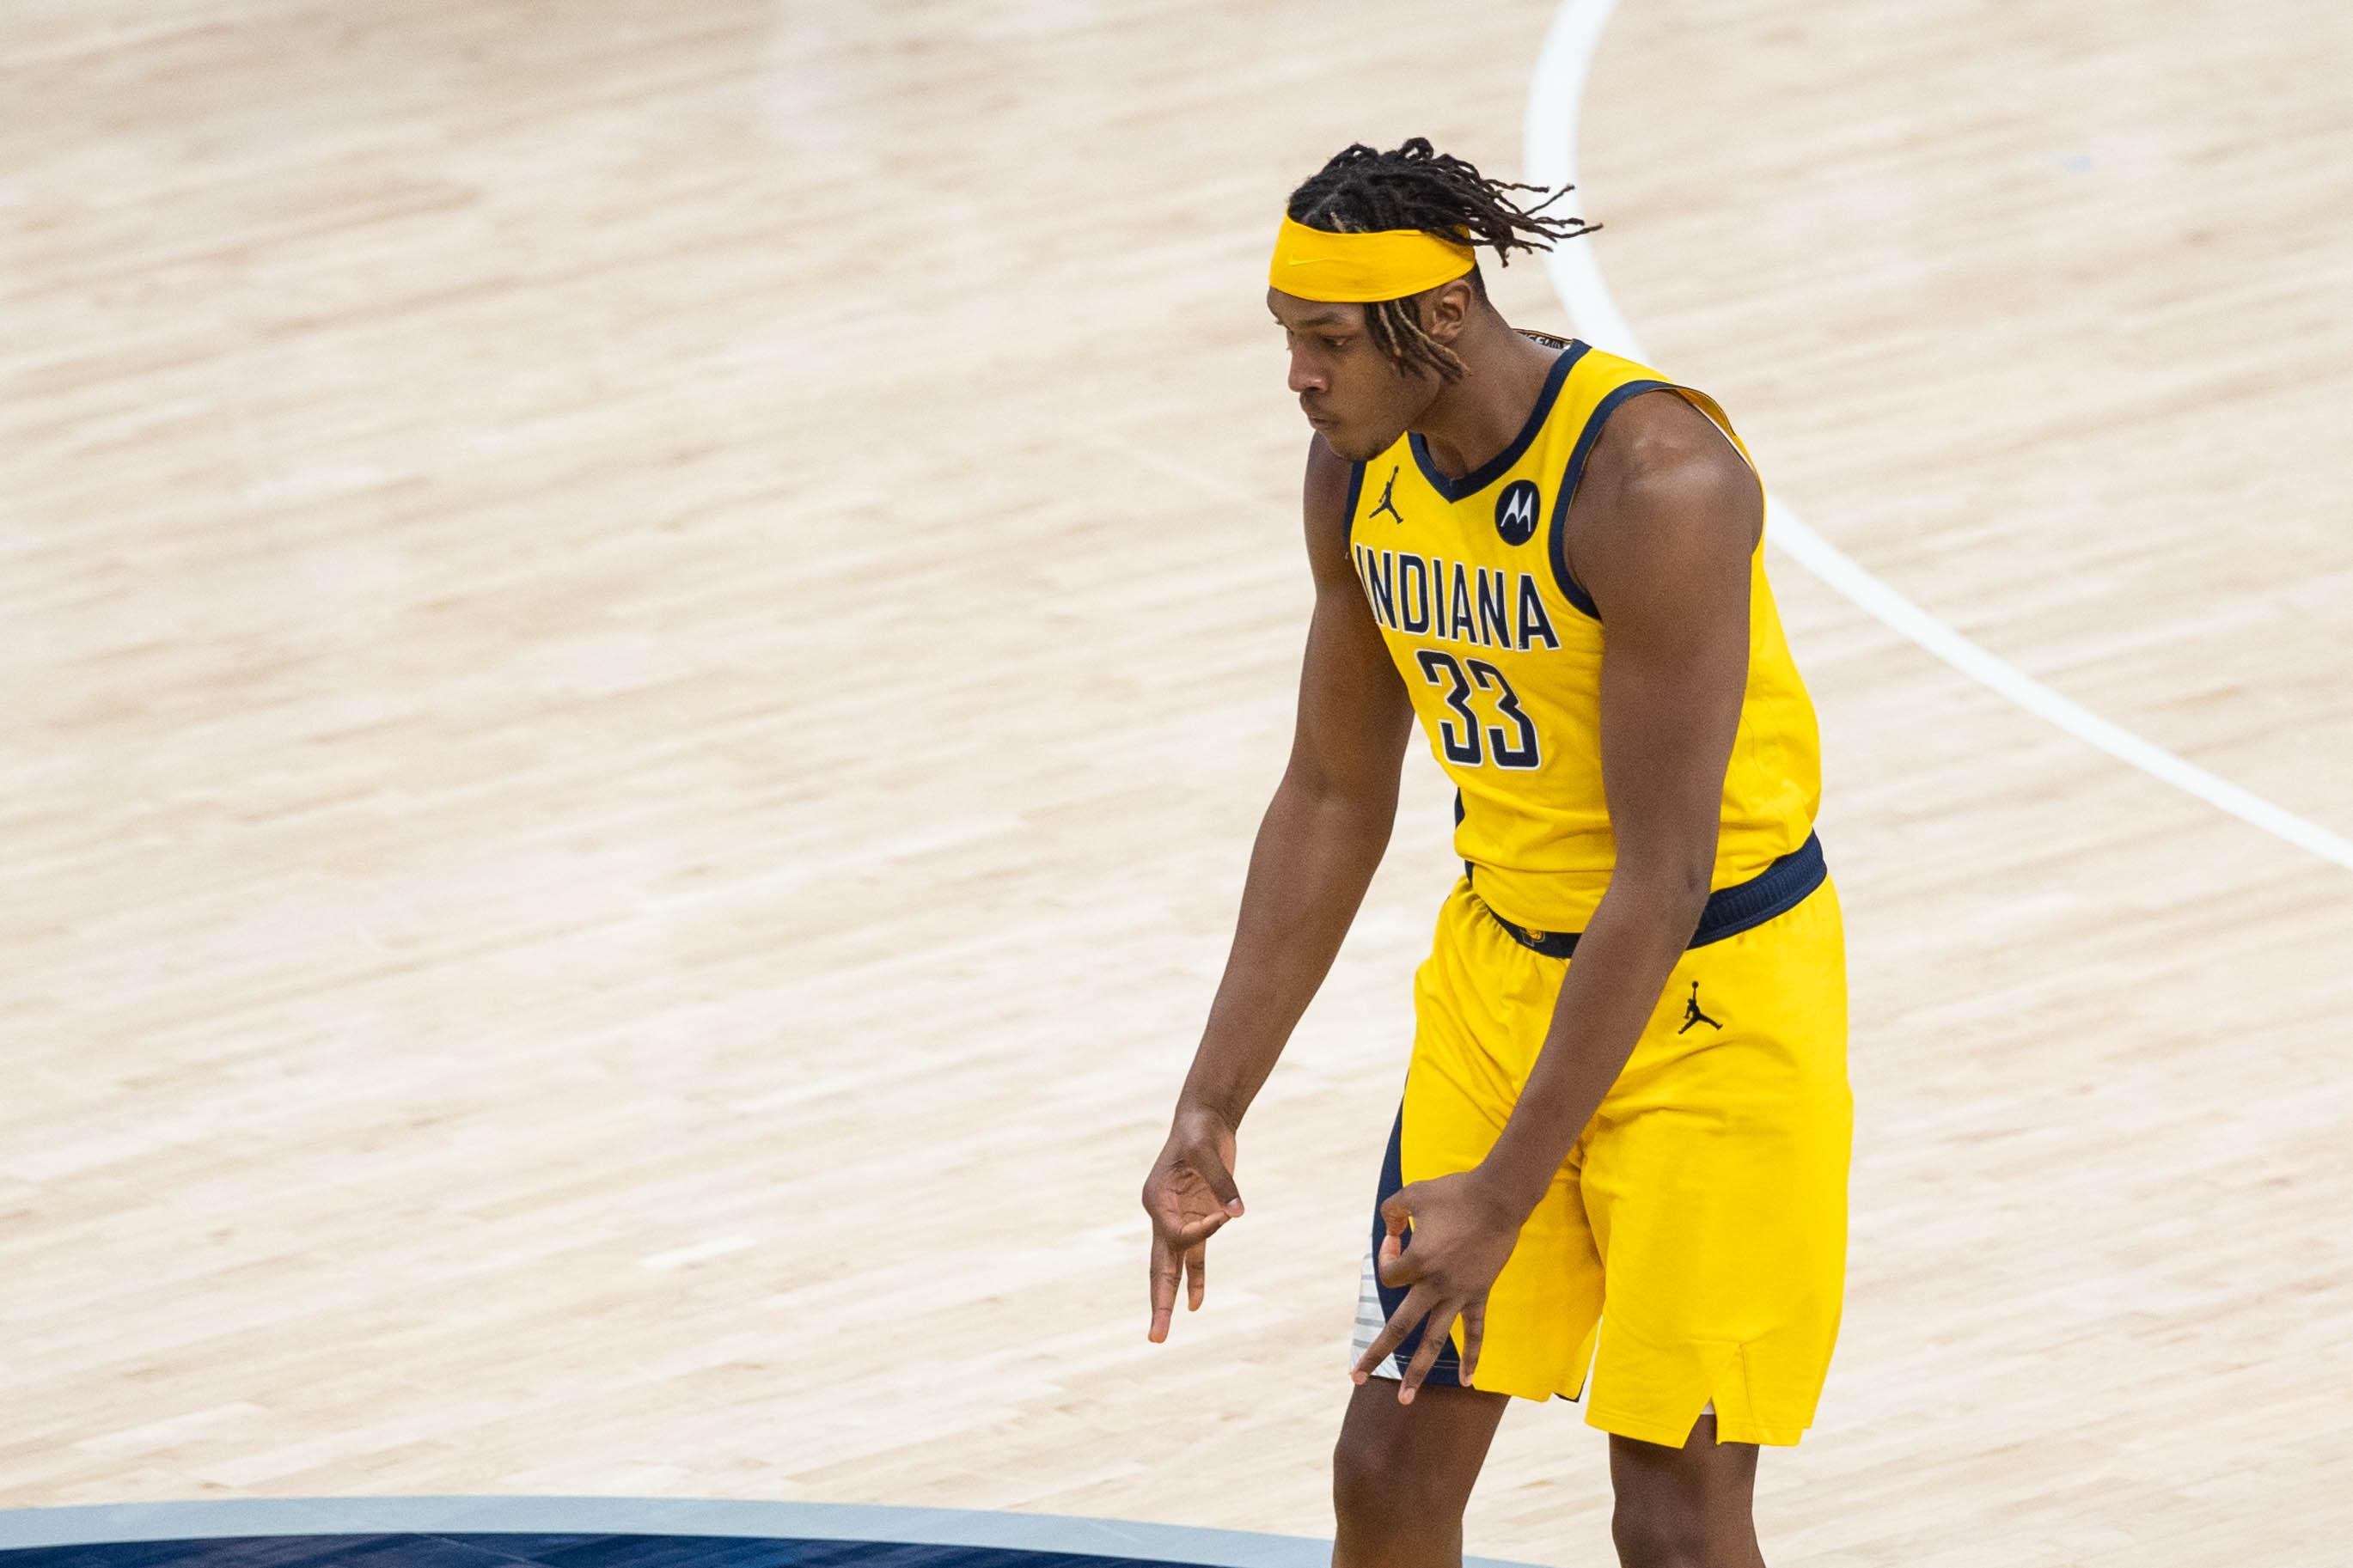 Feb 5, 2021; Indianapolis, Indiana, USA; Indiana Pacers center Myles Turner (33) celebrates a made three point basket in the fourth quarter against the New Orleans Pelicans at Bankers Life Fieldhouse. Mandatory Credit: Trevor Ruszkowski-USA TODAY Sports / Trevor Ruszkowski-USA TODAY Sports